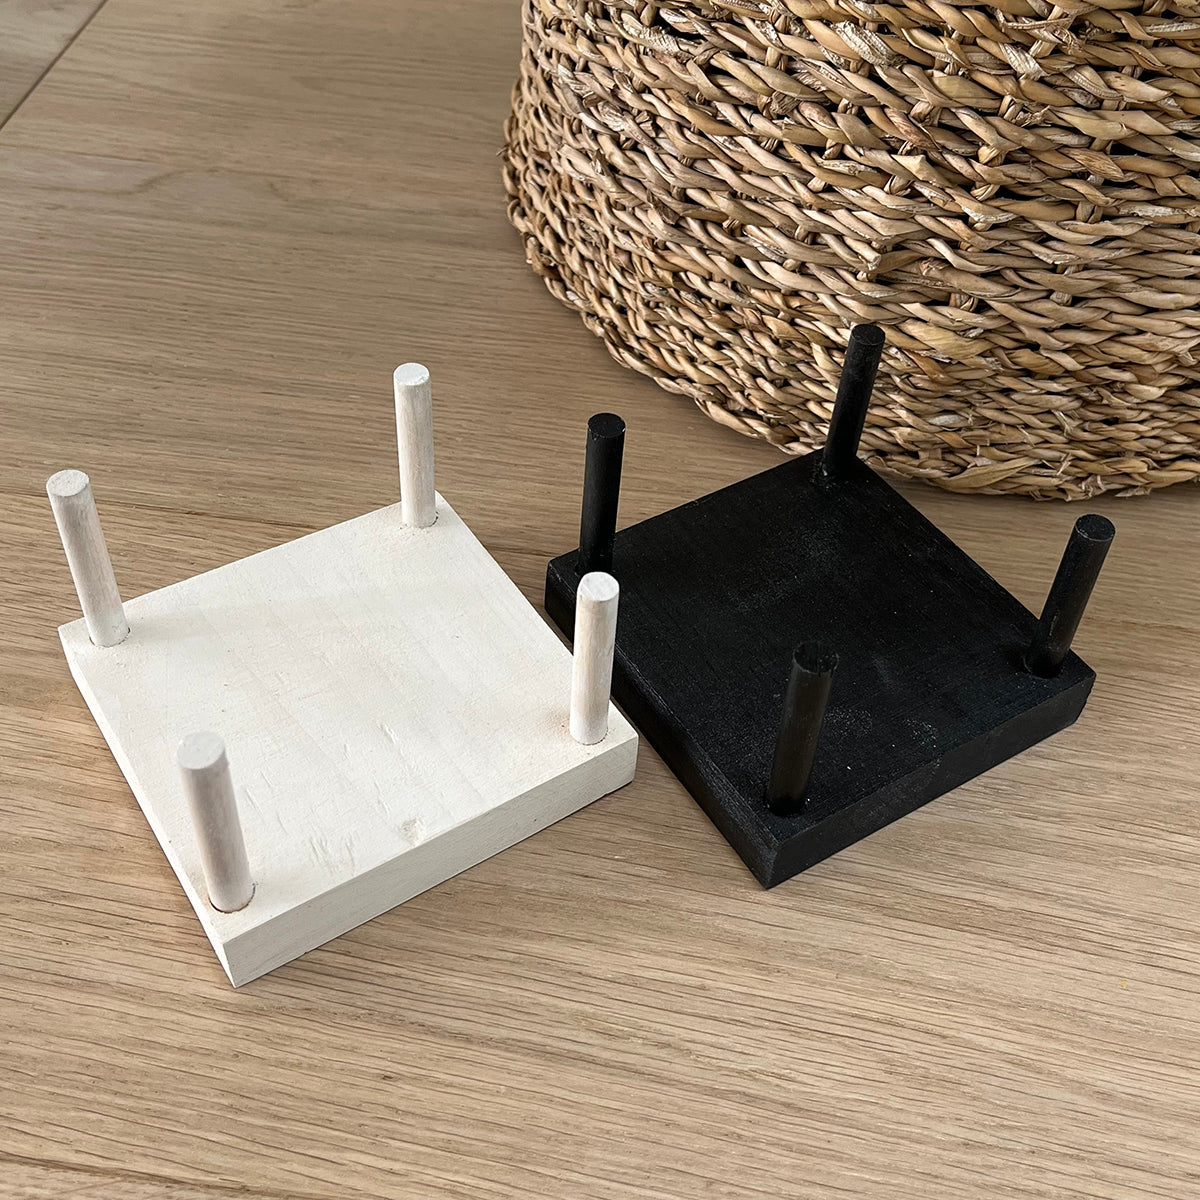 WOOD COASTER STAND - 4 pc